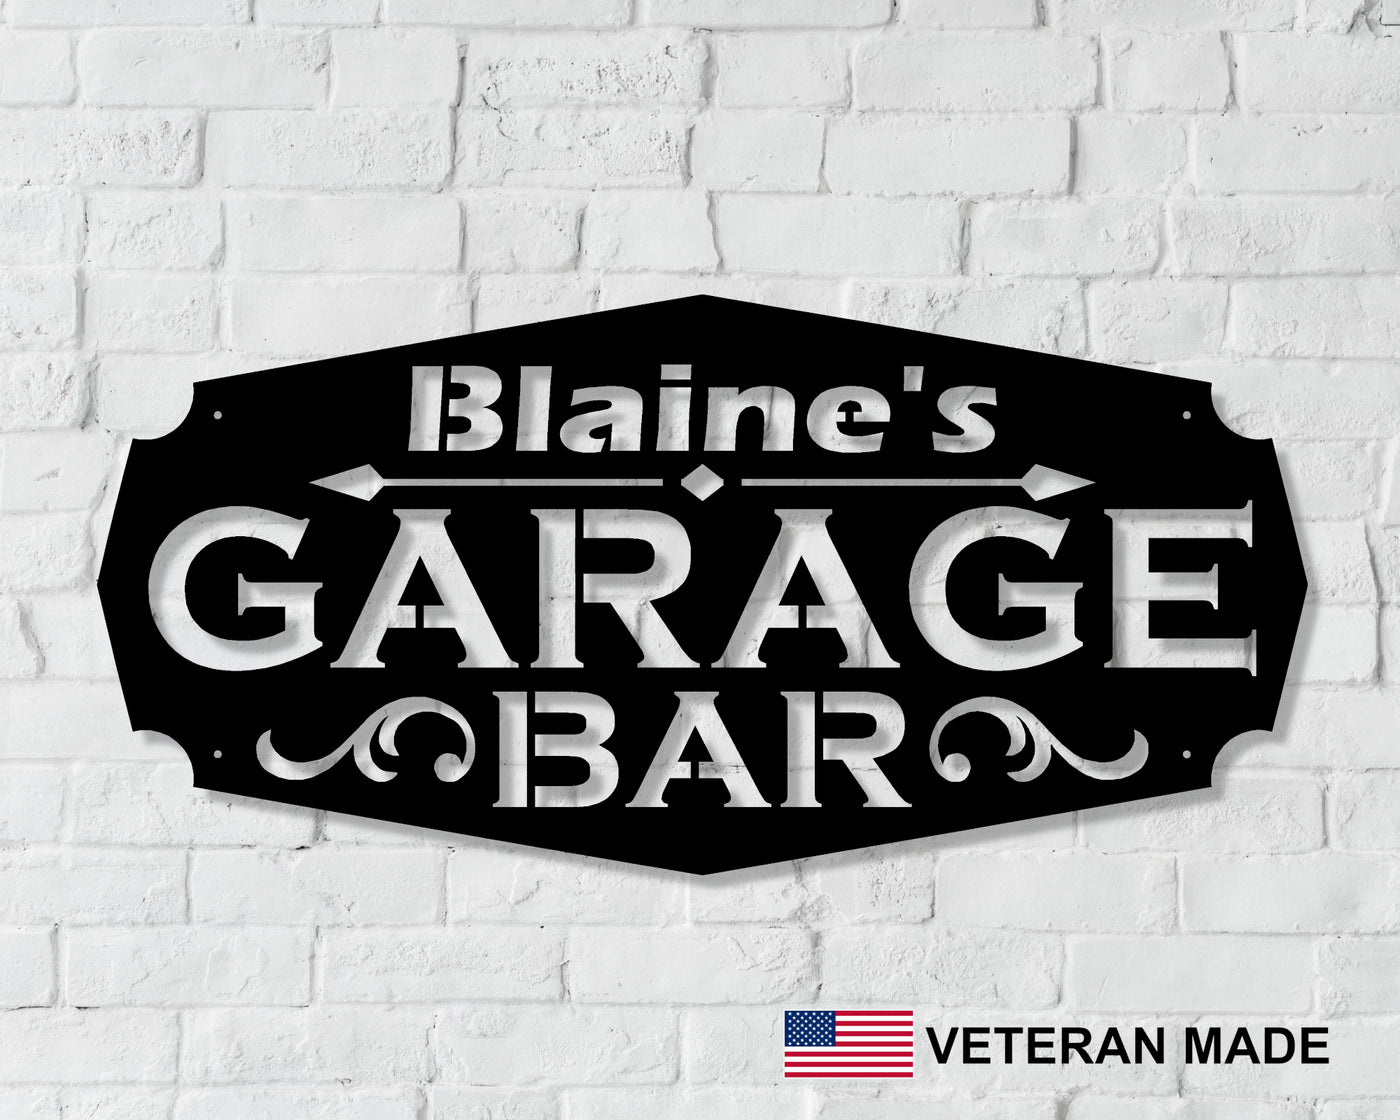 Personalized Garage Bar Metal Sign with Name - Madison Iron and Wood - Personalized sign - metal outdoor decor - Steel deocrations - american made products - veteran owned business products - fencing decorations - fencing supplies - custom wall decorations - personalized wall signs - steel - decorative post caps - steel post caps - metal post caps - brackets - structural brackets - home improvement - easter - easter decorations - easter gift - easter yard decor